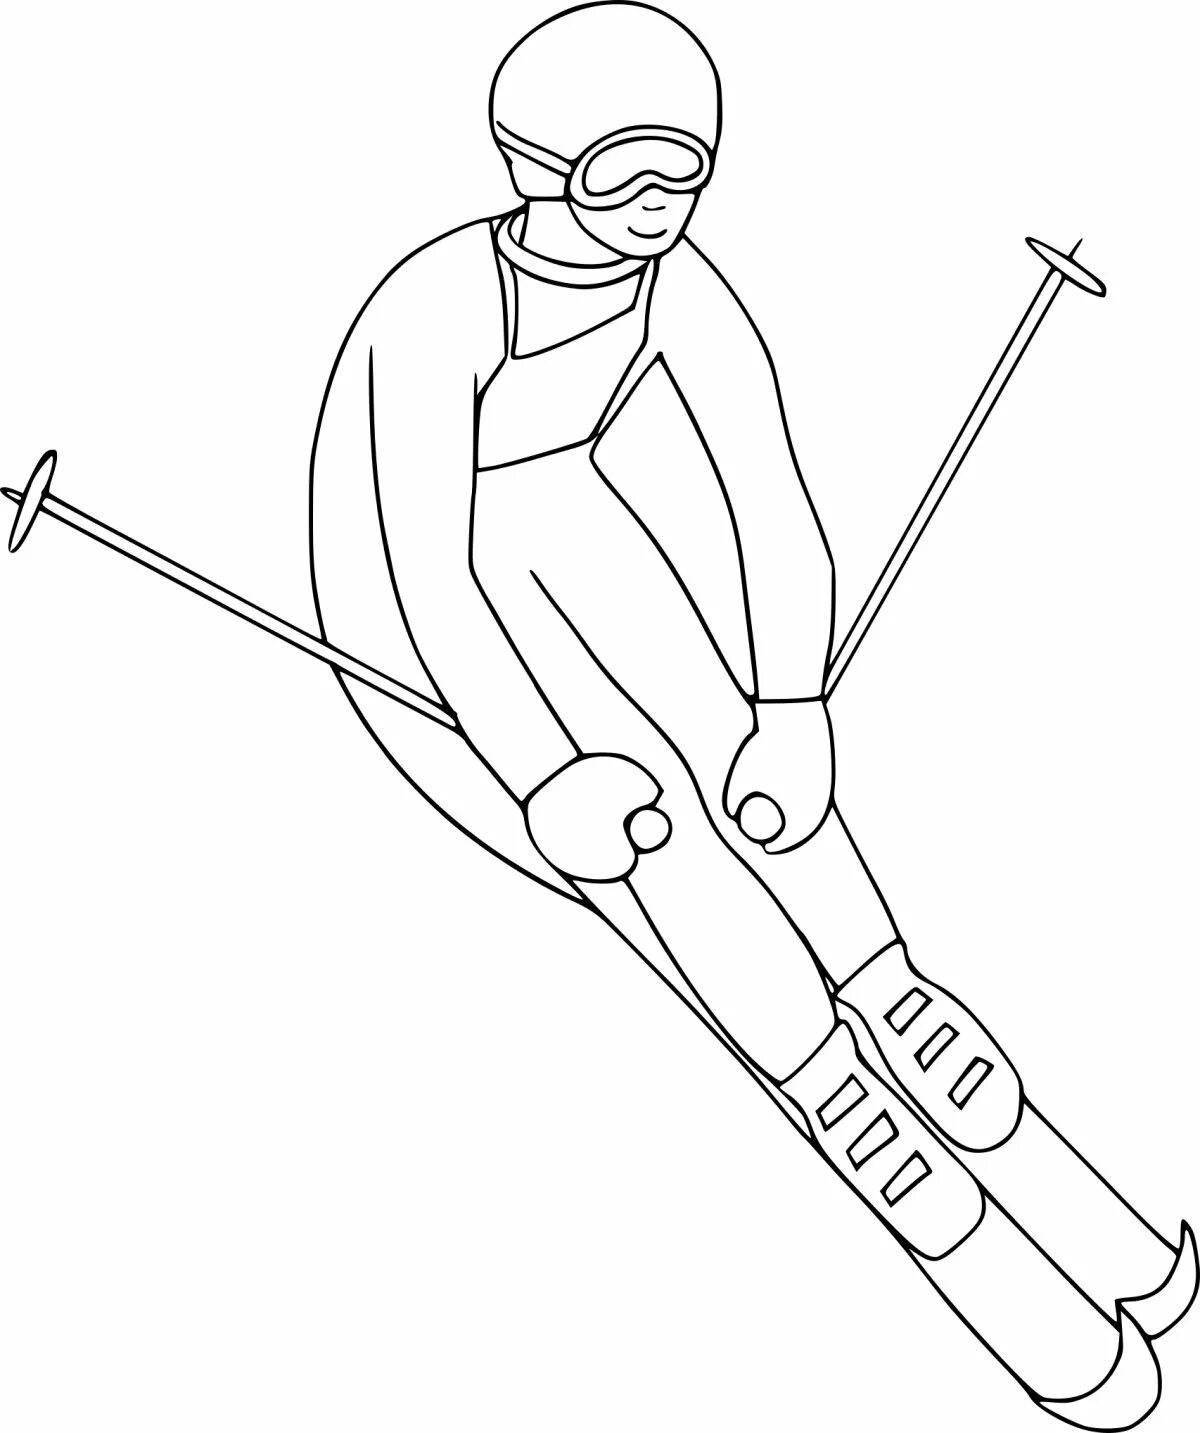 Great luge coloring page